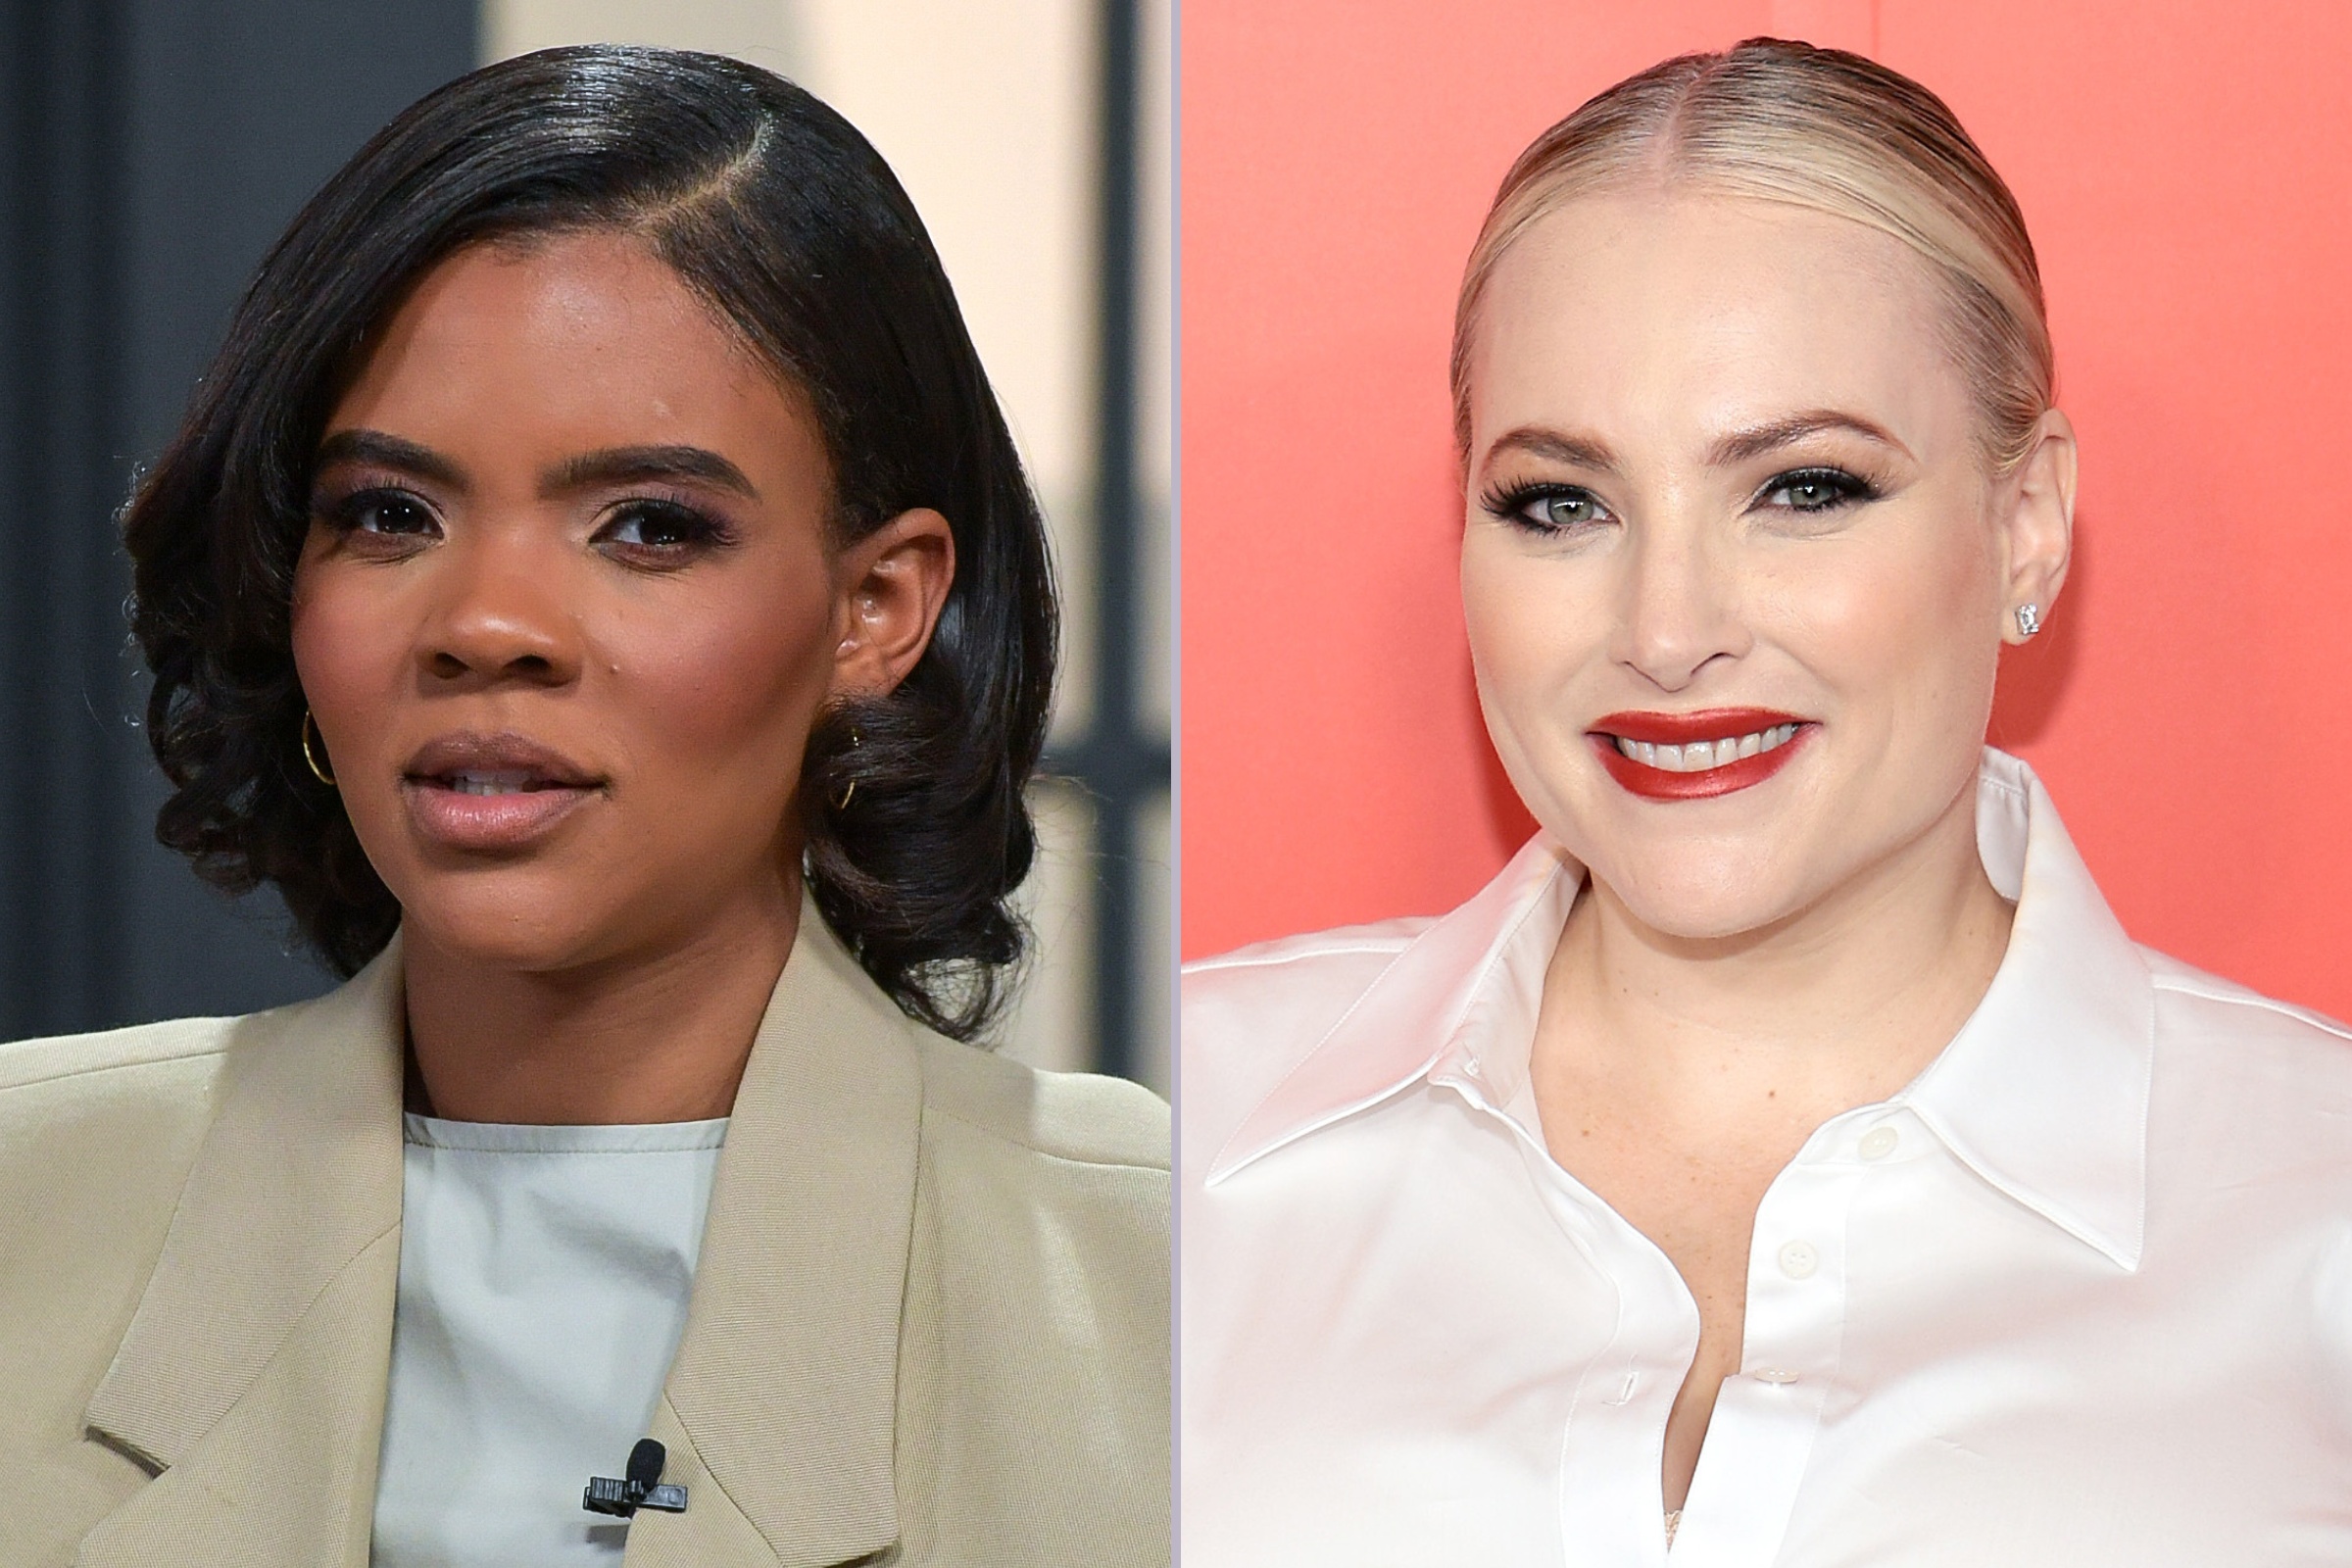 Candace Owens calls Meghan McCain “clinically obese”